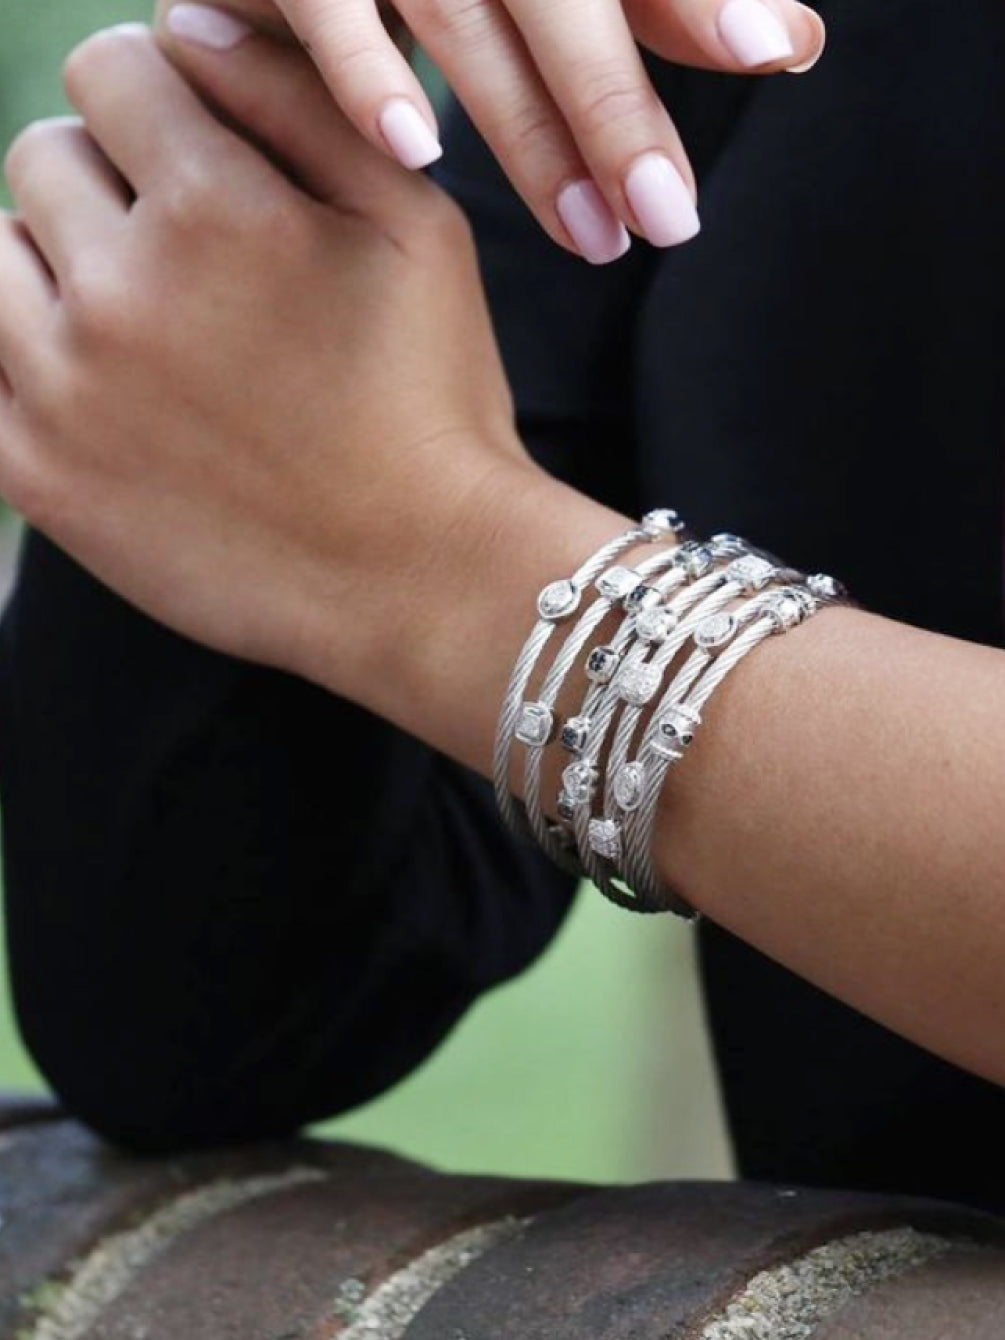 A lady with multiple of our bracelets on her left arm